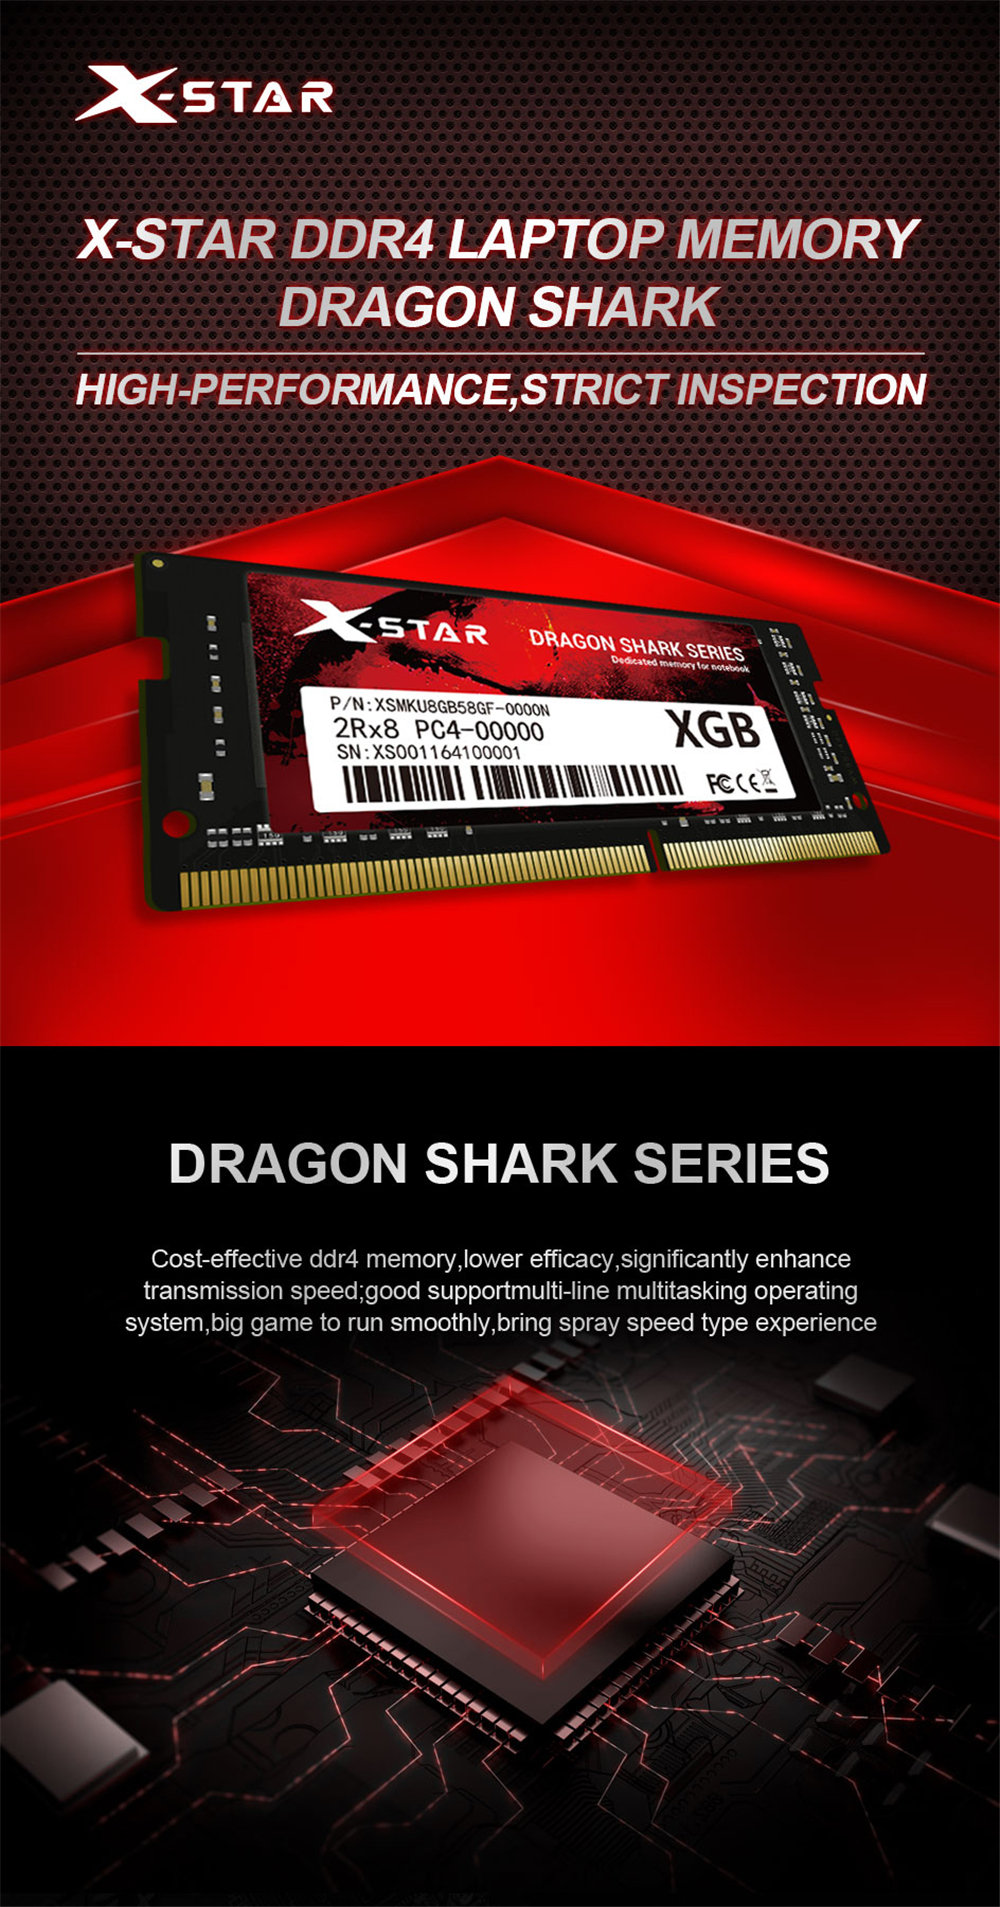 X-STAR-DDR4-4GB-8GB-16GB-2400Mhz-12V-RAM-Computer-Memory-Card-Stick--For-Laptop-Computer-1717437-1